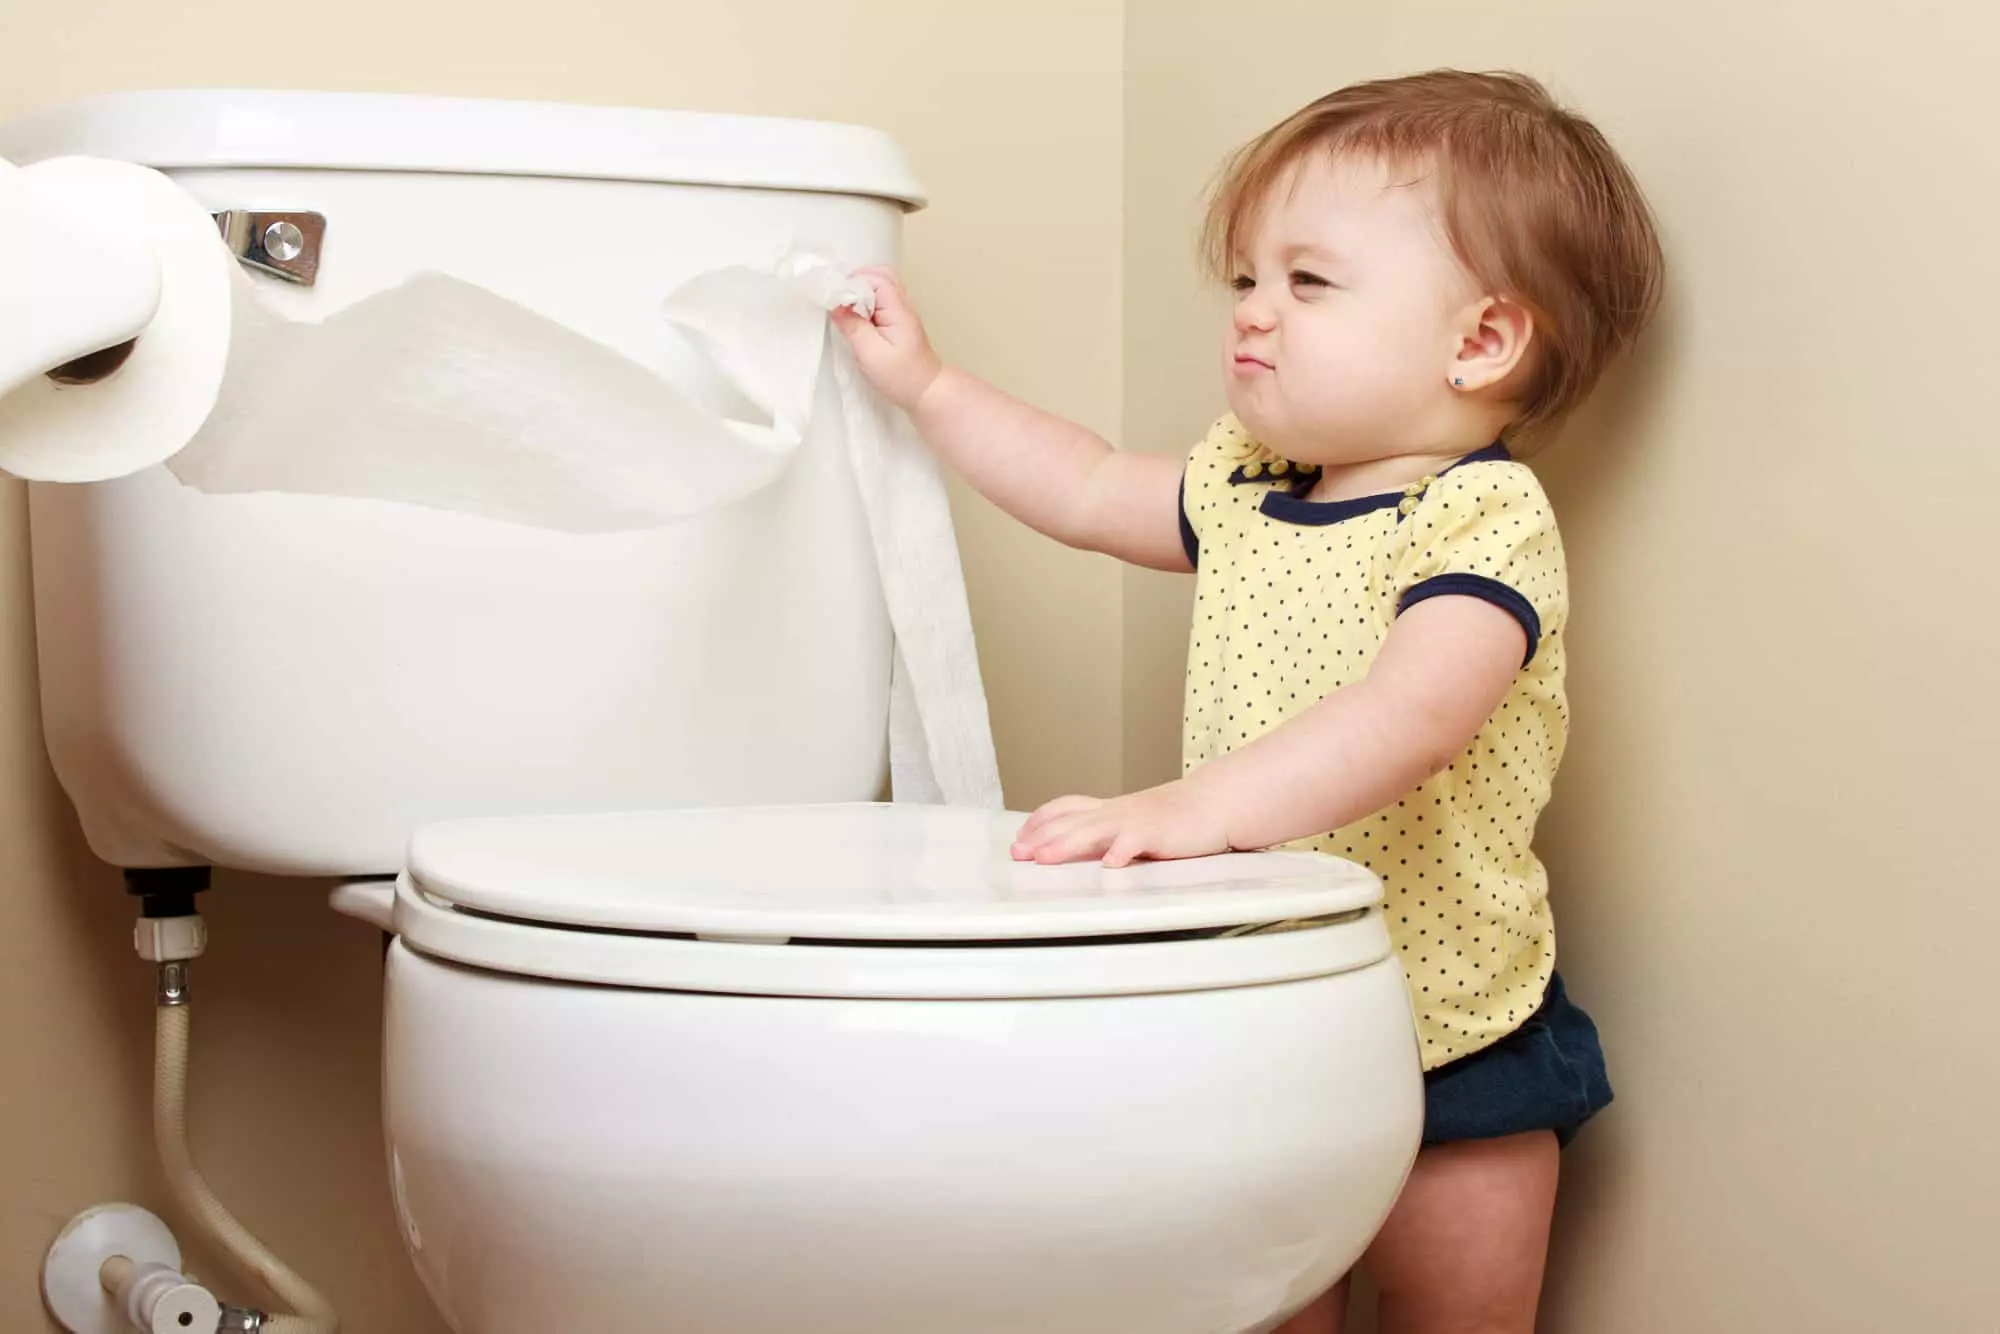 Child in the toilet